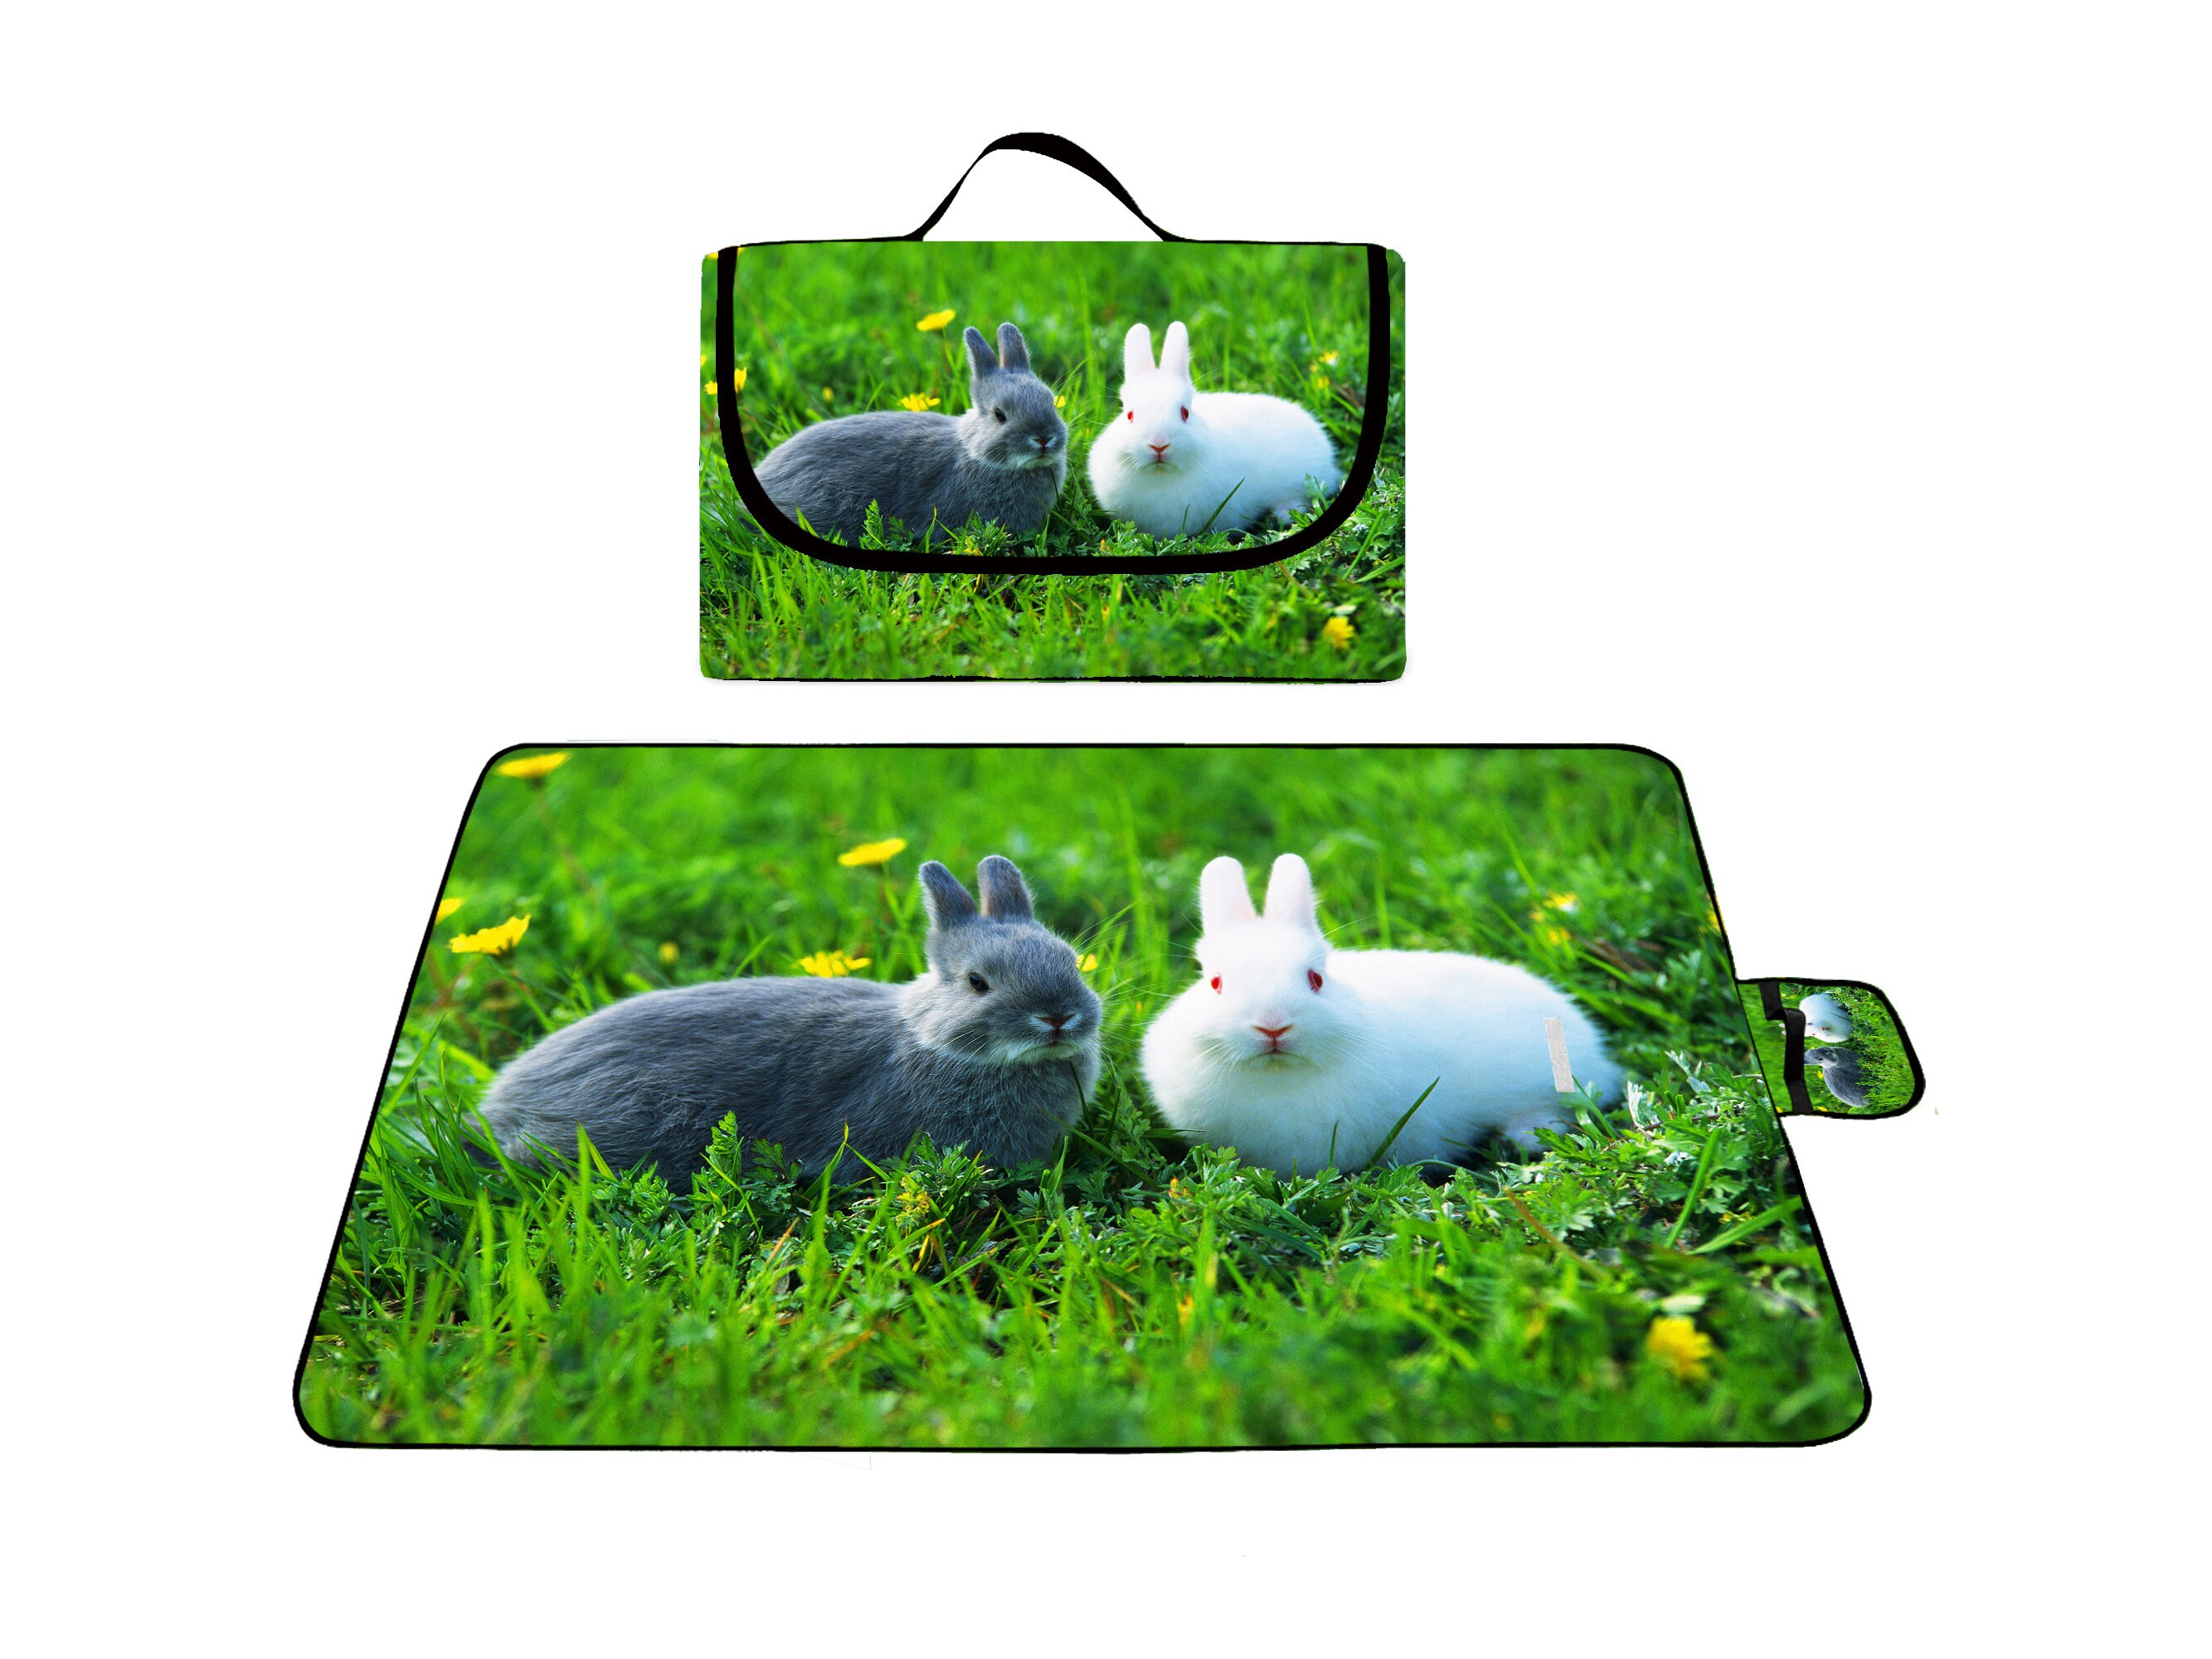 Combo Pack Edible Natural Grass Hideaway with Woven Grass Mat Beds Handcrafted Grass House with Bed Mat for Rabbits and Guinea Pigs Extra Large 14”x11”x10” Foldable Toy Hut with Openings 